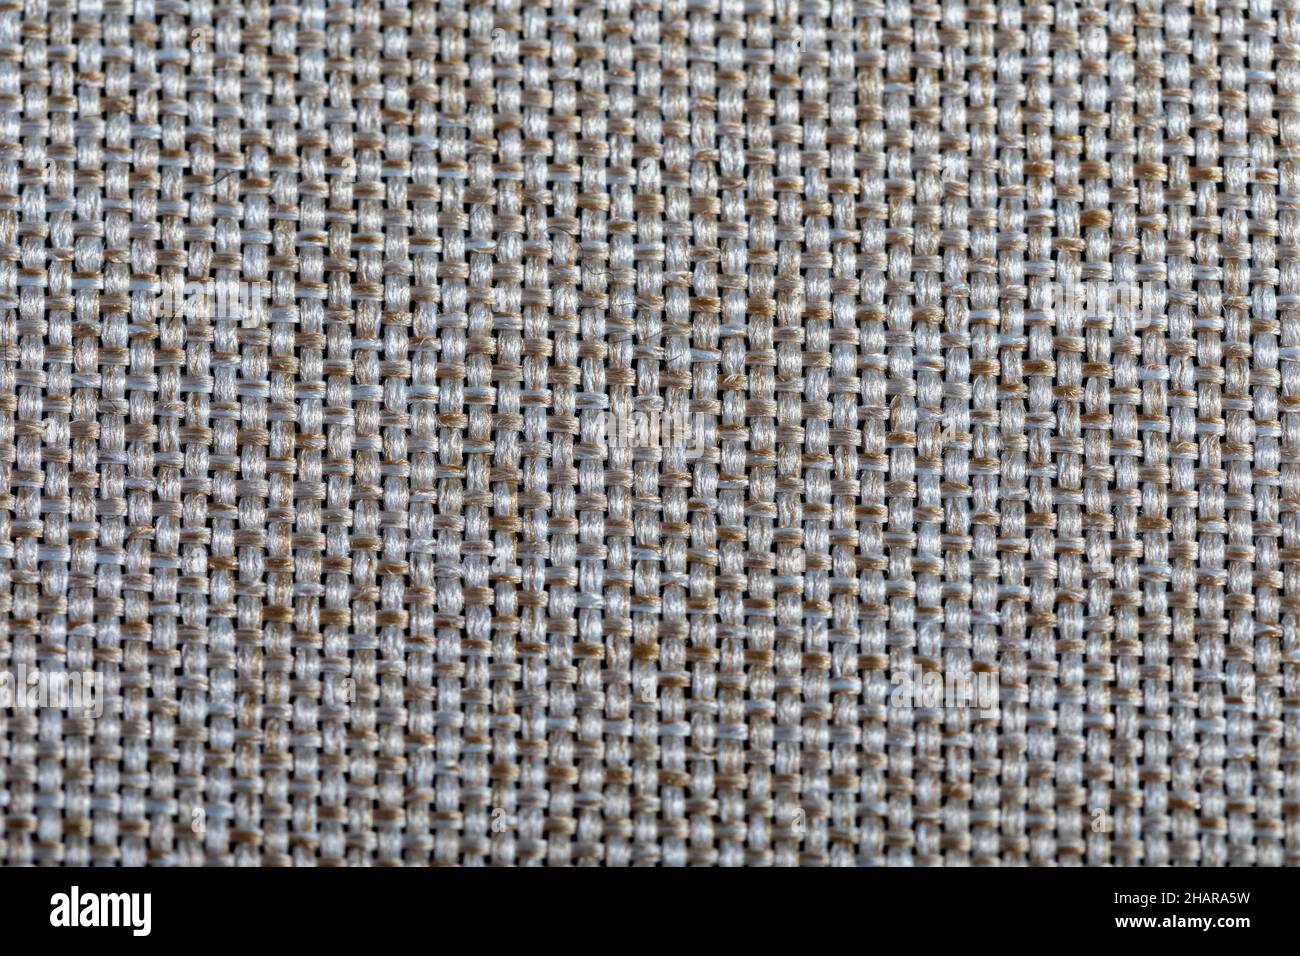 Brown fabric texture. Furniture upholstery textiles. Embossed pattern. Woven fibers. The material is soft touch. Minimalism concept. High detail macro Stock Photo